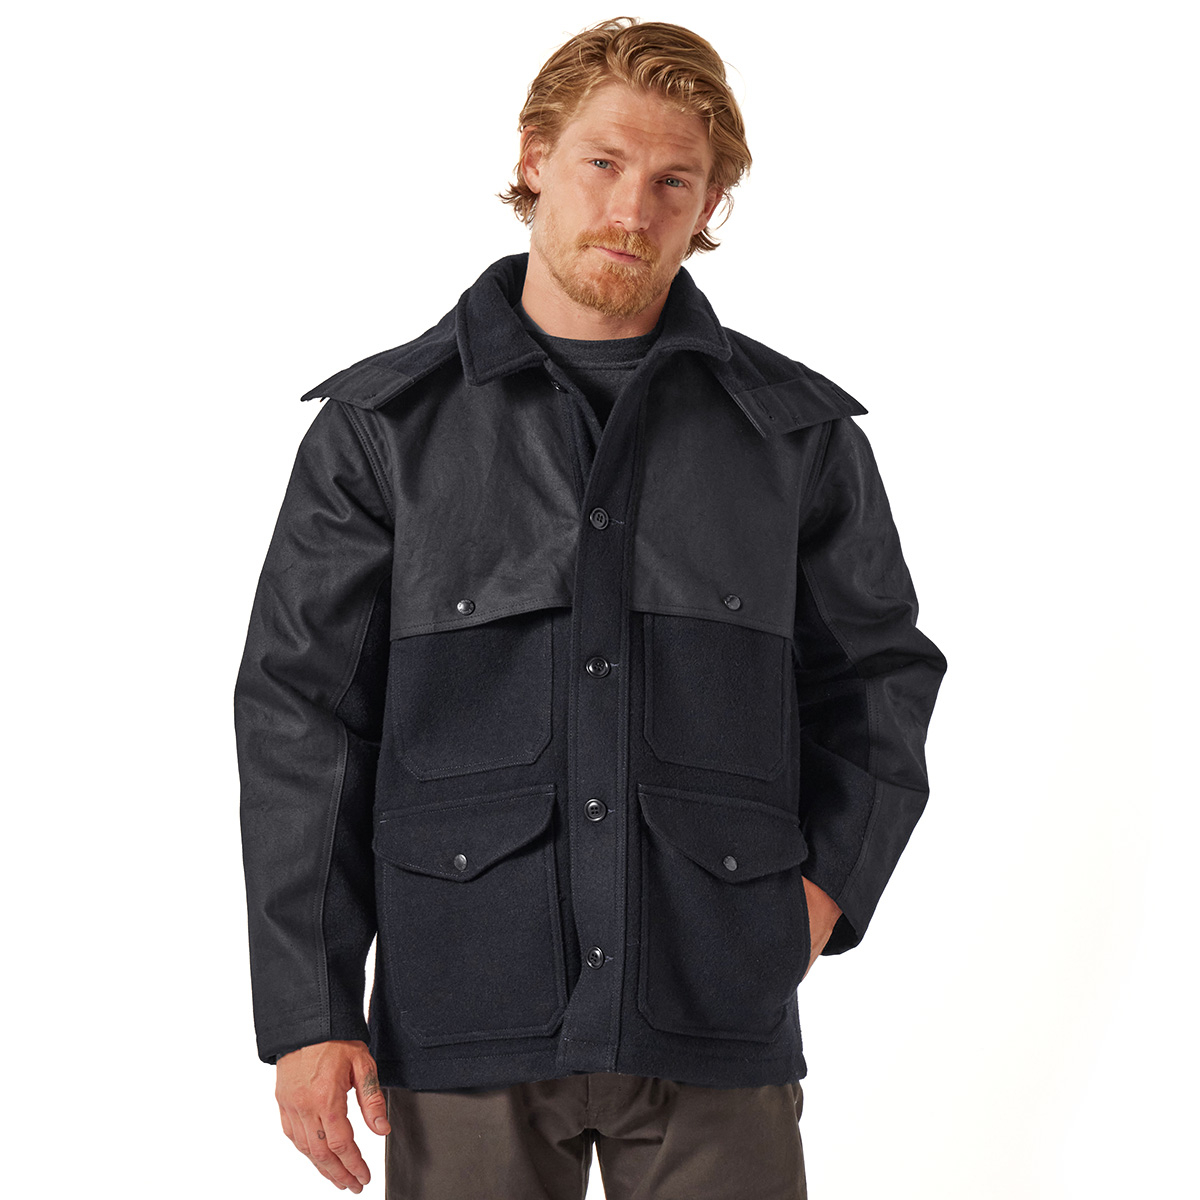 Filson Mackinaw Wool Double Coat Dark Navy, made of 100% virgin Mackinaw Wool for comfort, natural water-repellency and insulating warmth in any weather conditions.